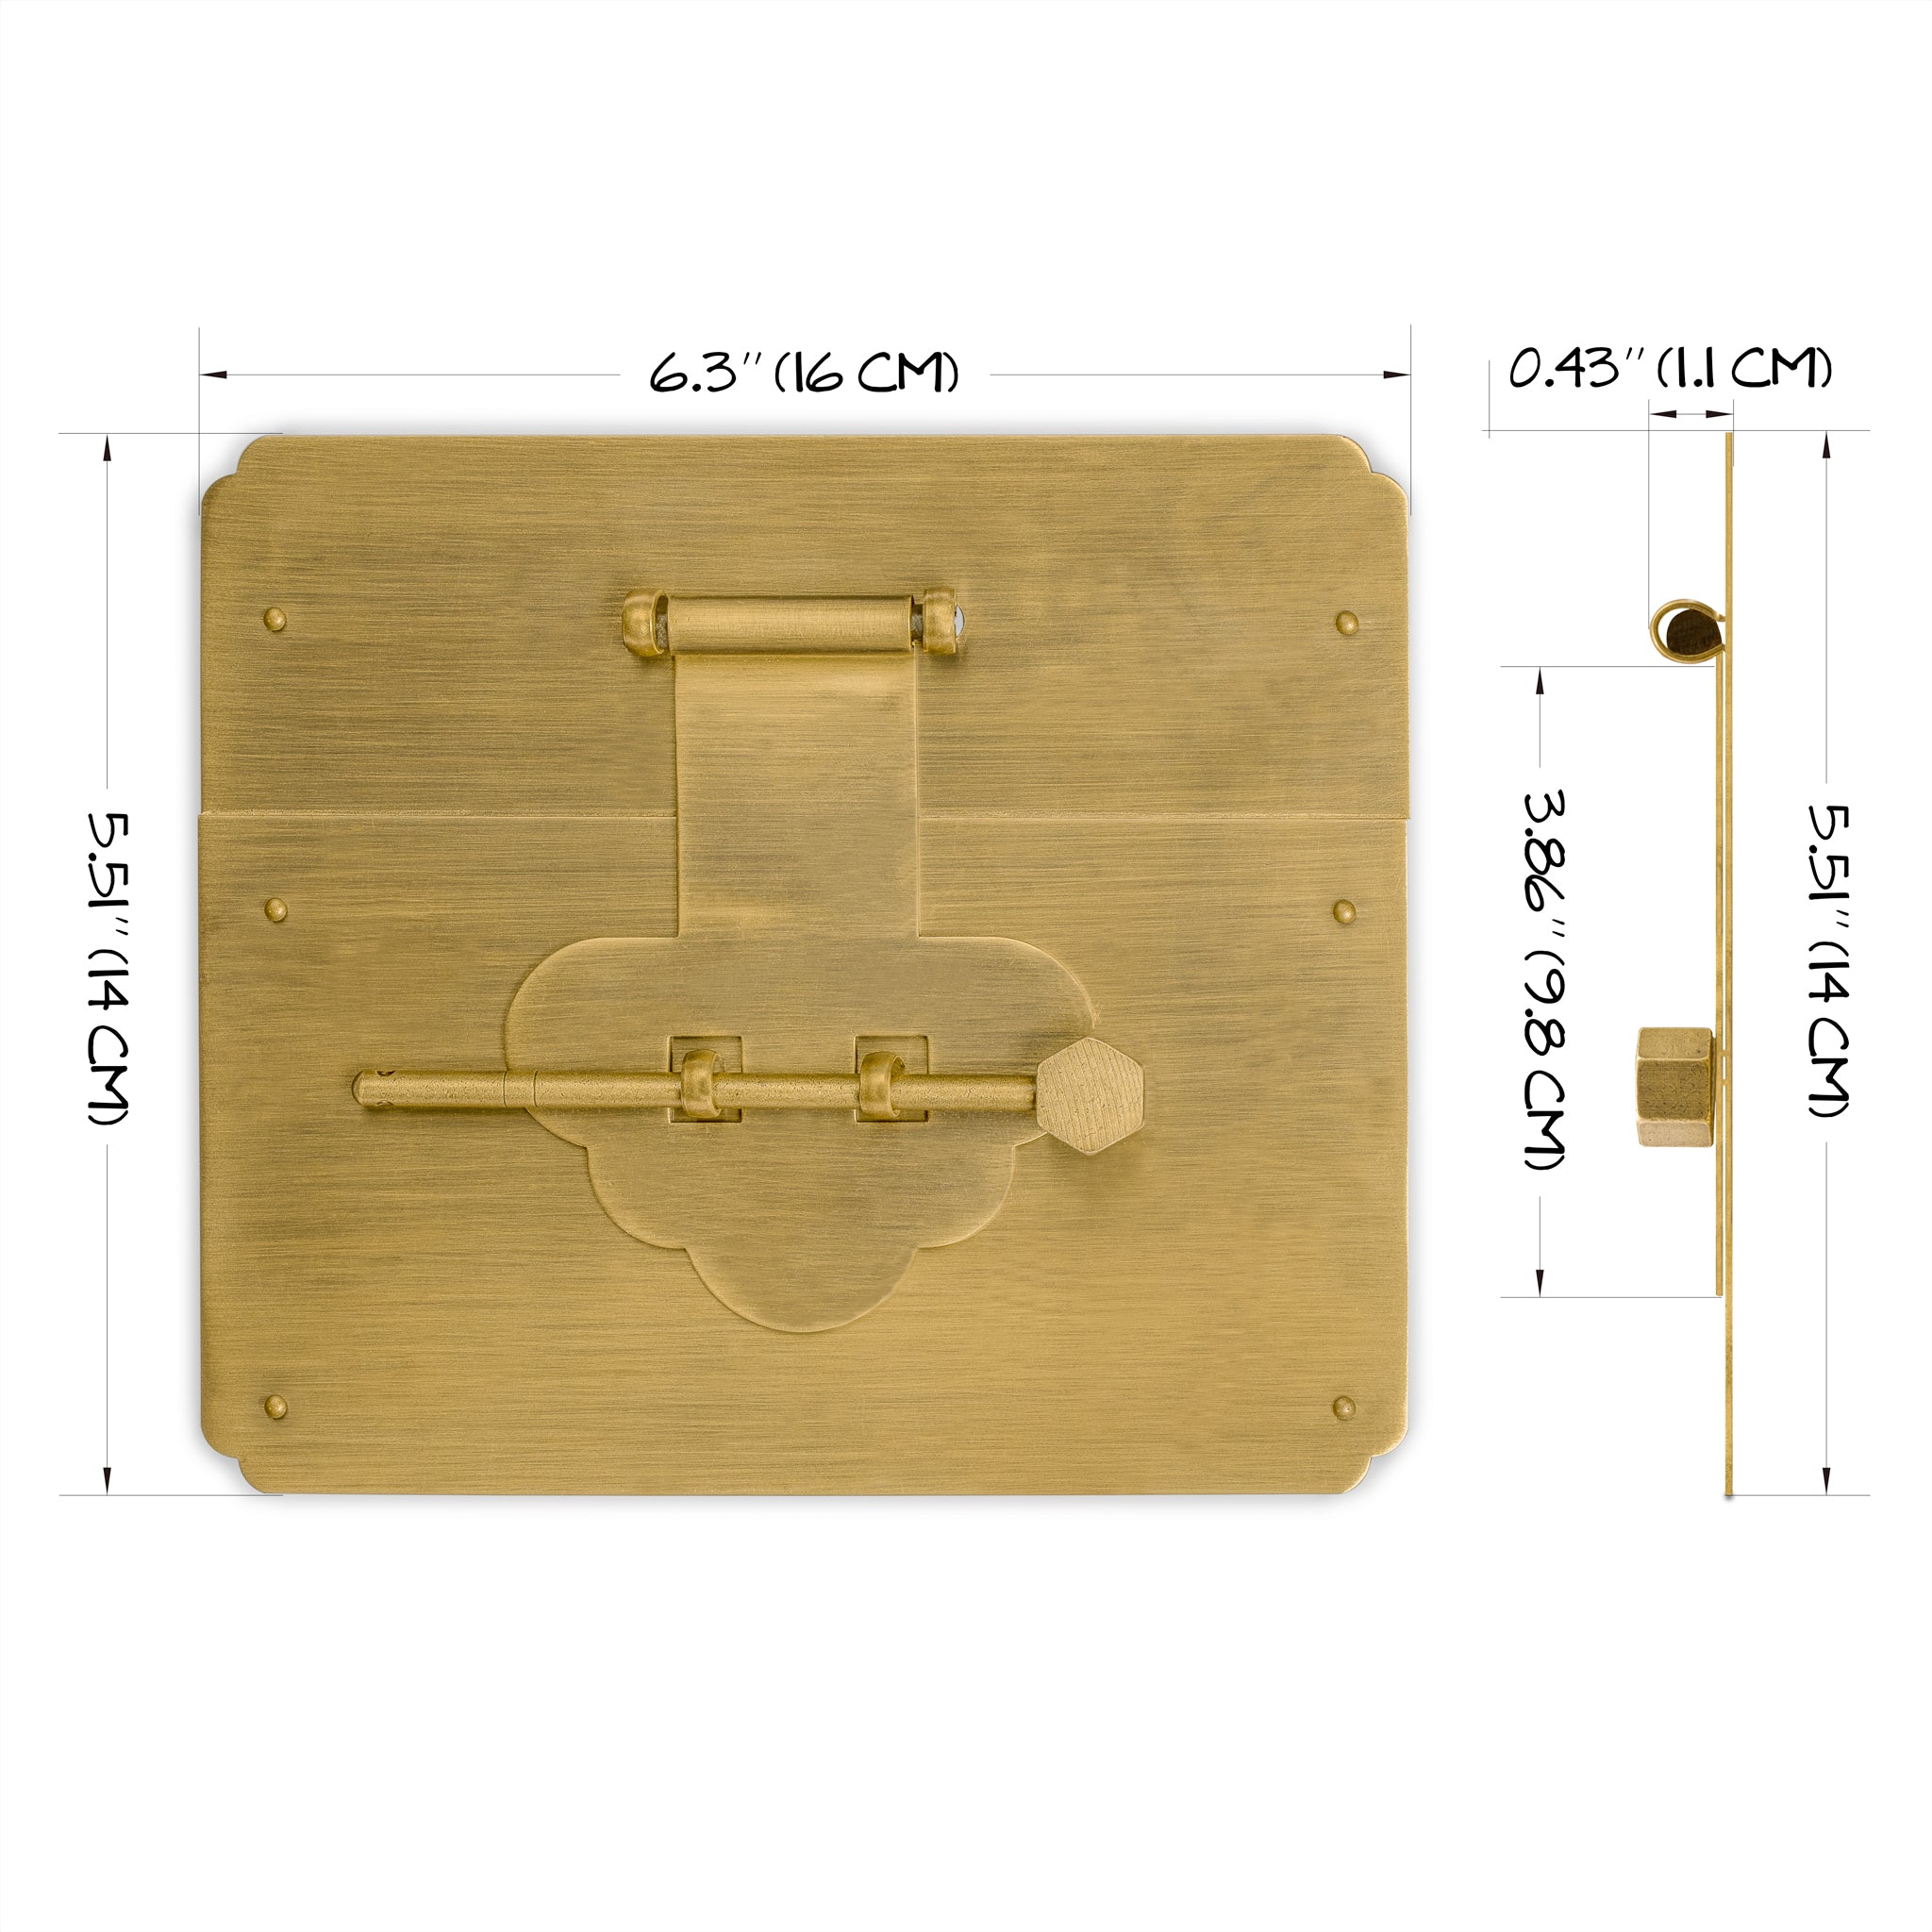 Mushroom Square Chest Box Face Plate Latch (5.5"x 6.5")-Chinese Brass Hardware